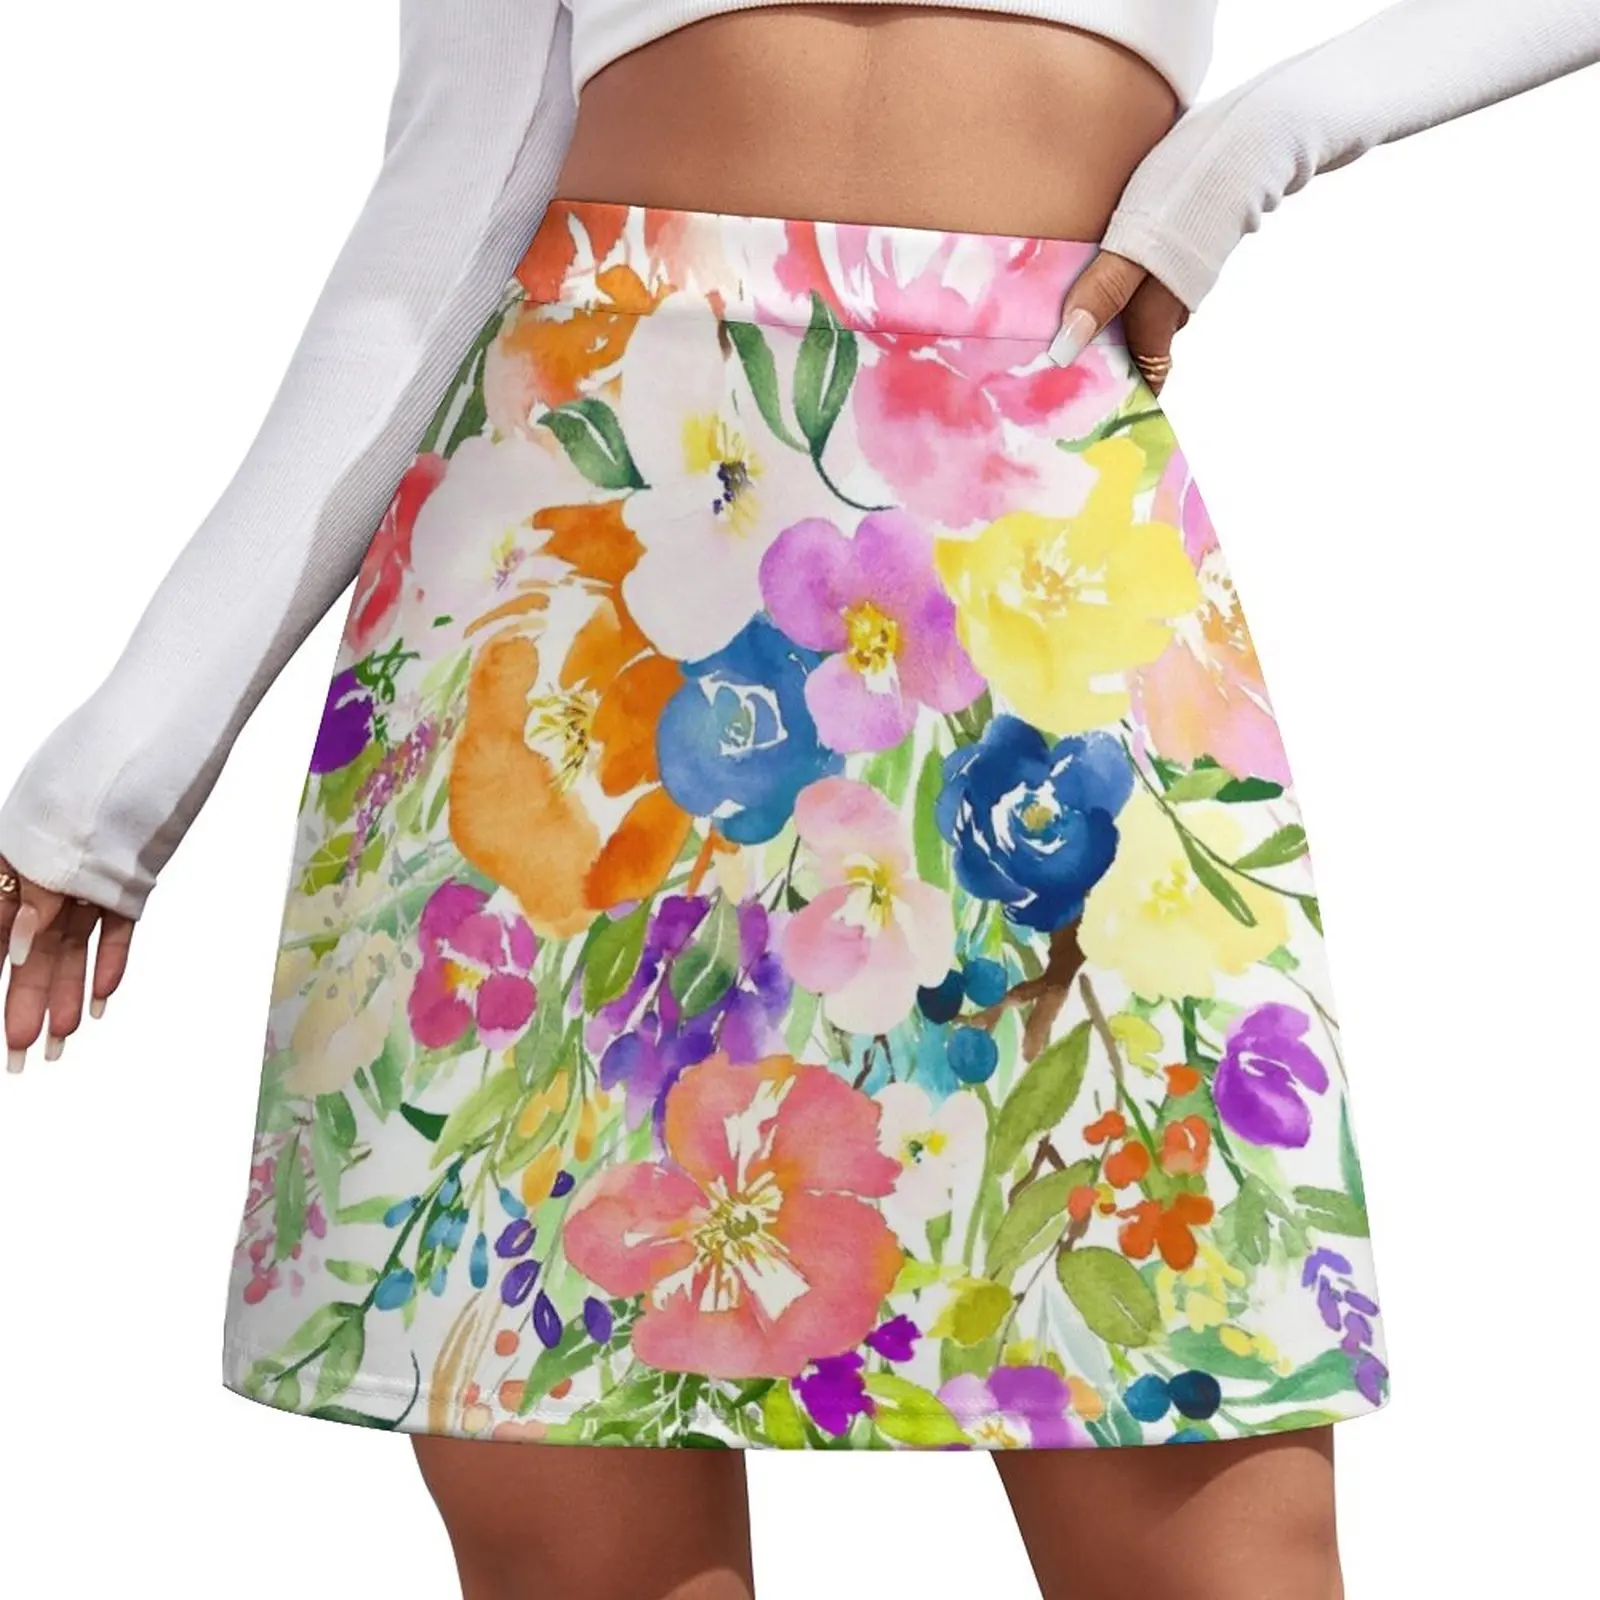 

Colorful Large Watercolor Flower Bouquet Mini Skirt 90s aesthetic short skirts for women